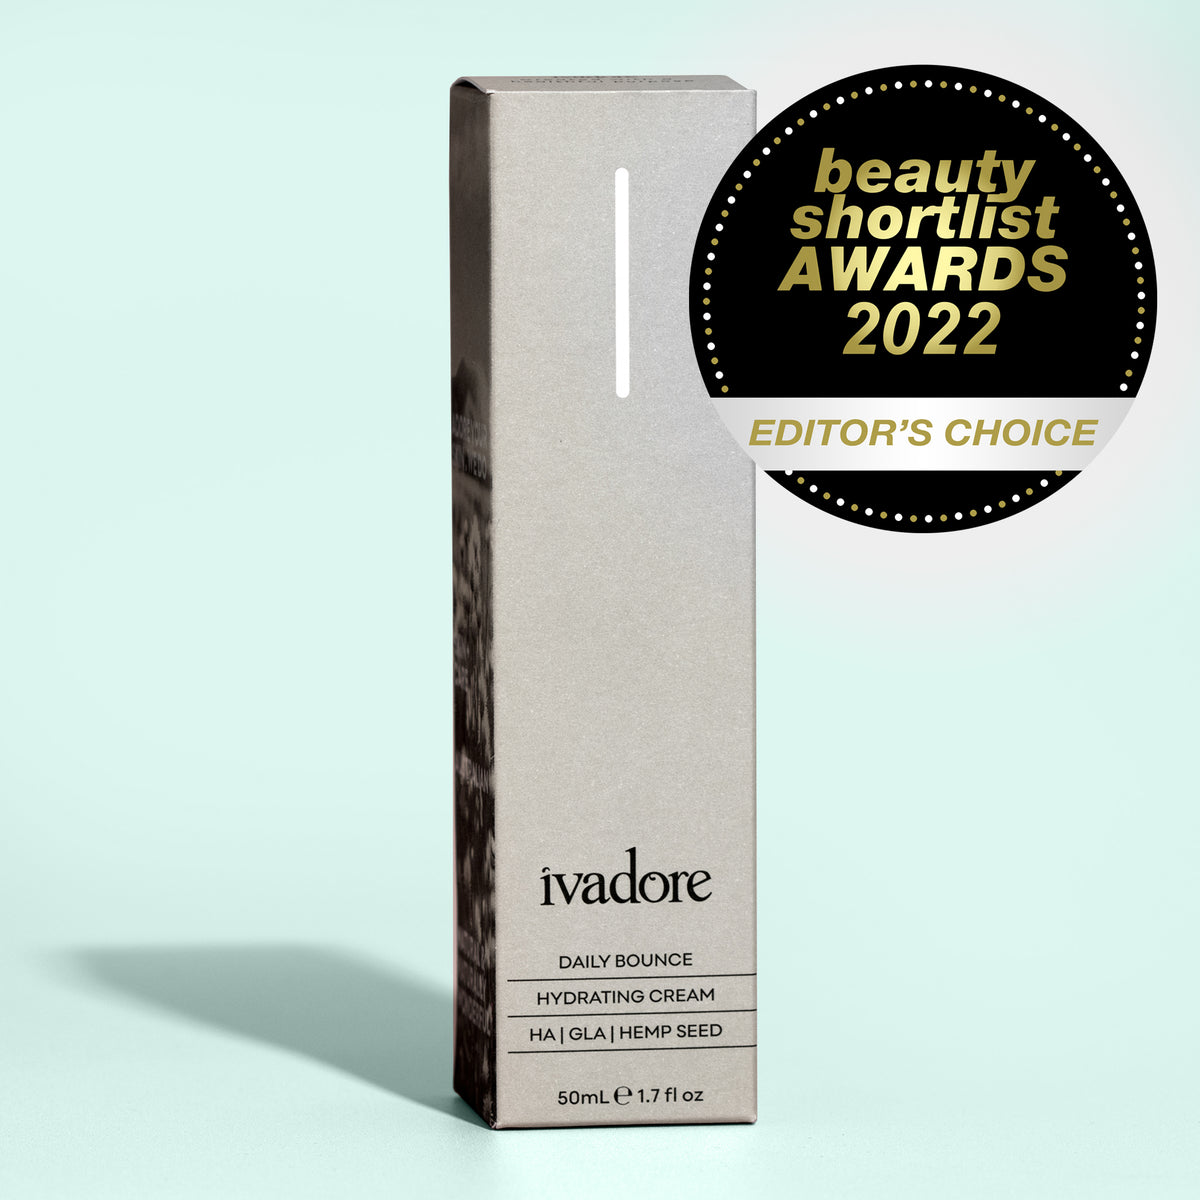 Daily Bounce Face Moisturiser box on mint green background with beauty shortlist 2022 editors choice awards badge